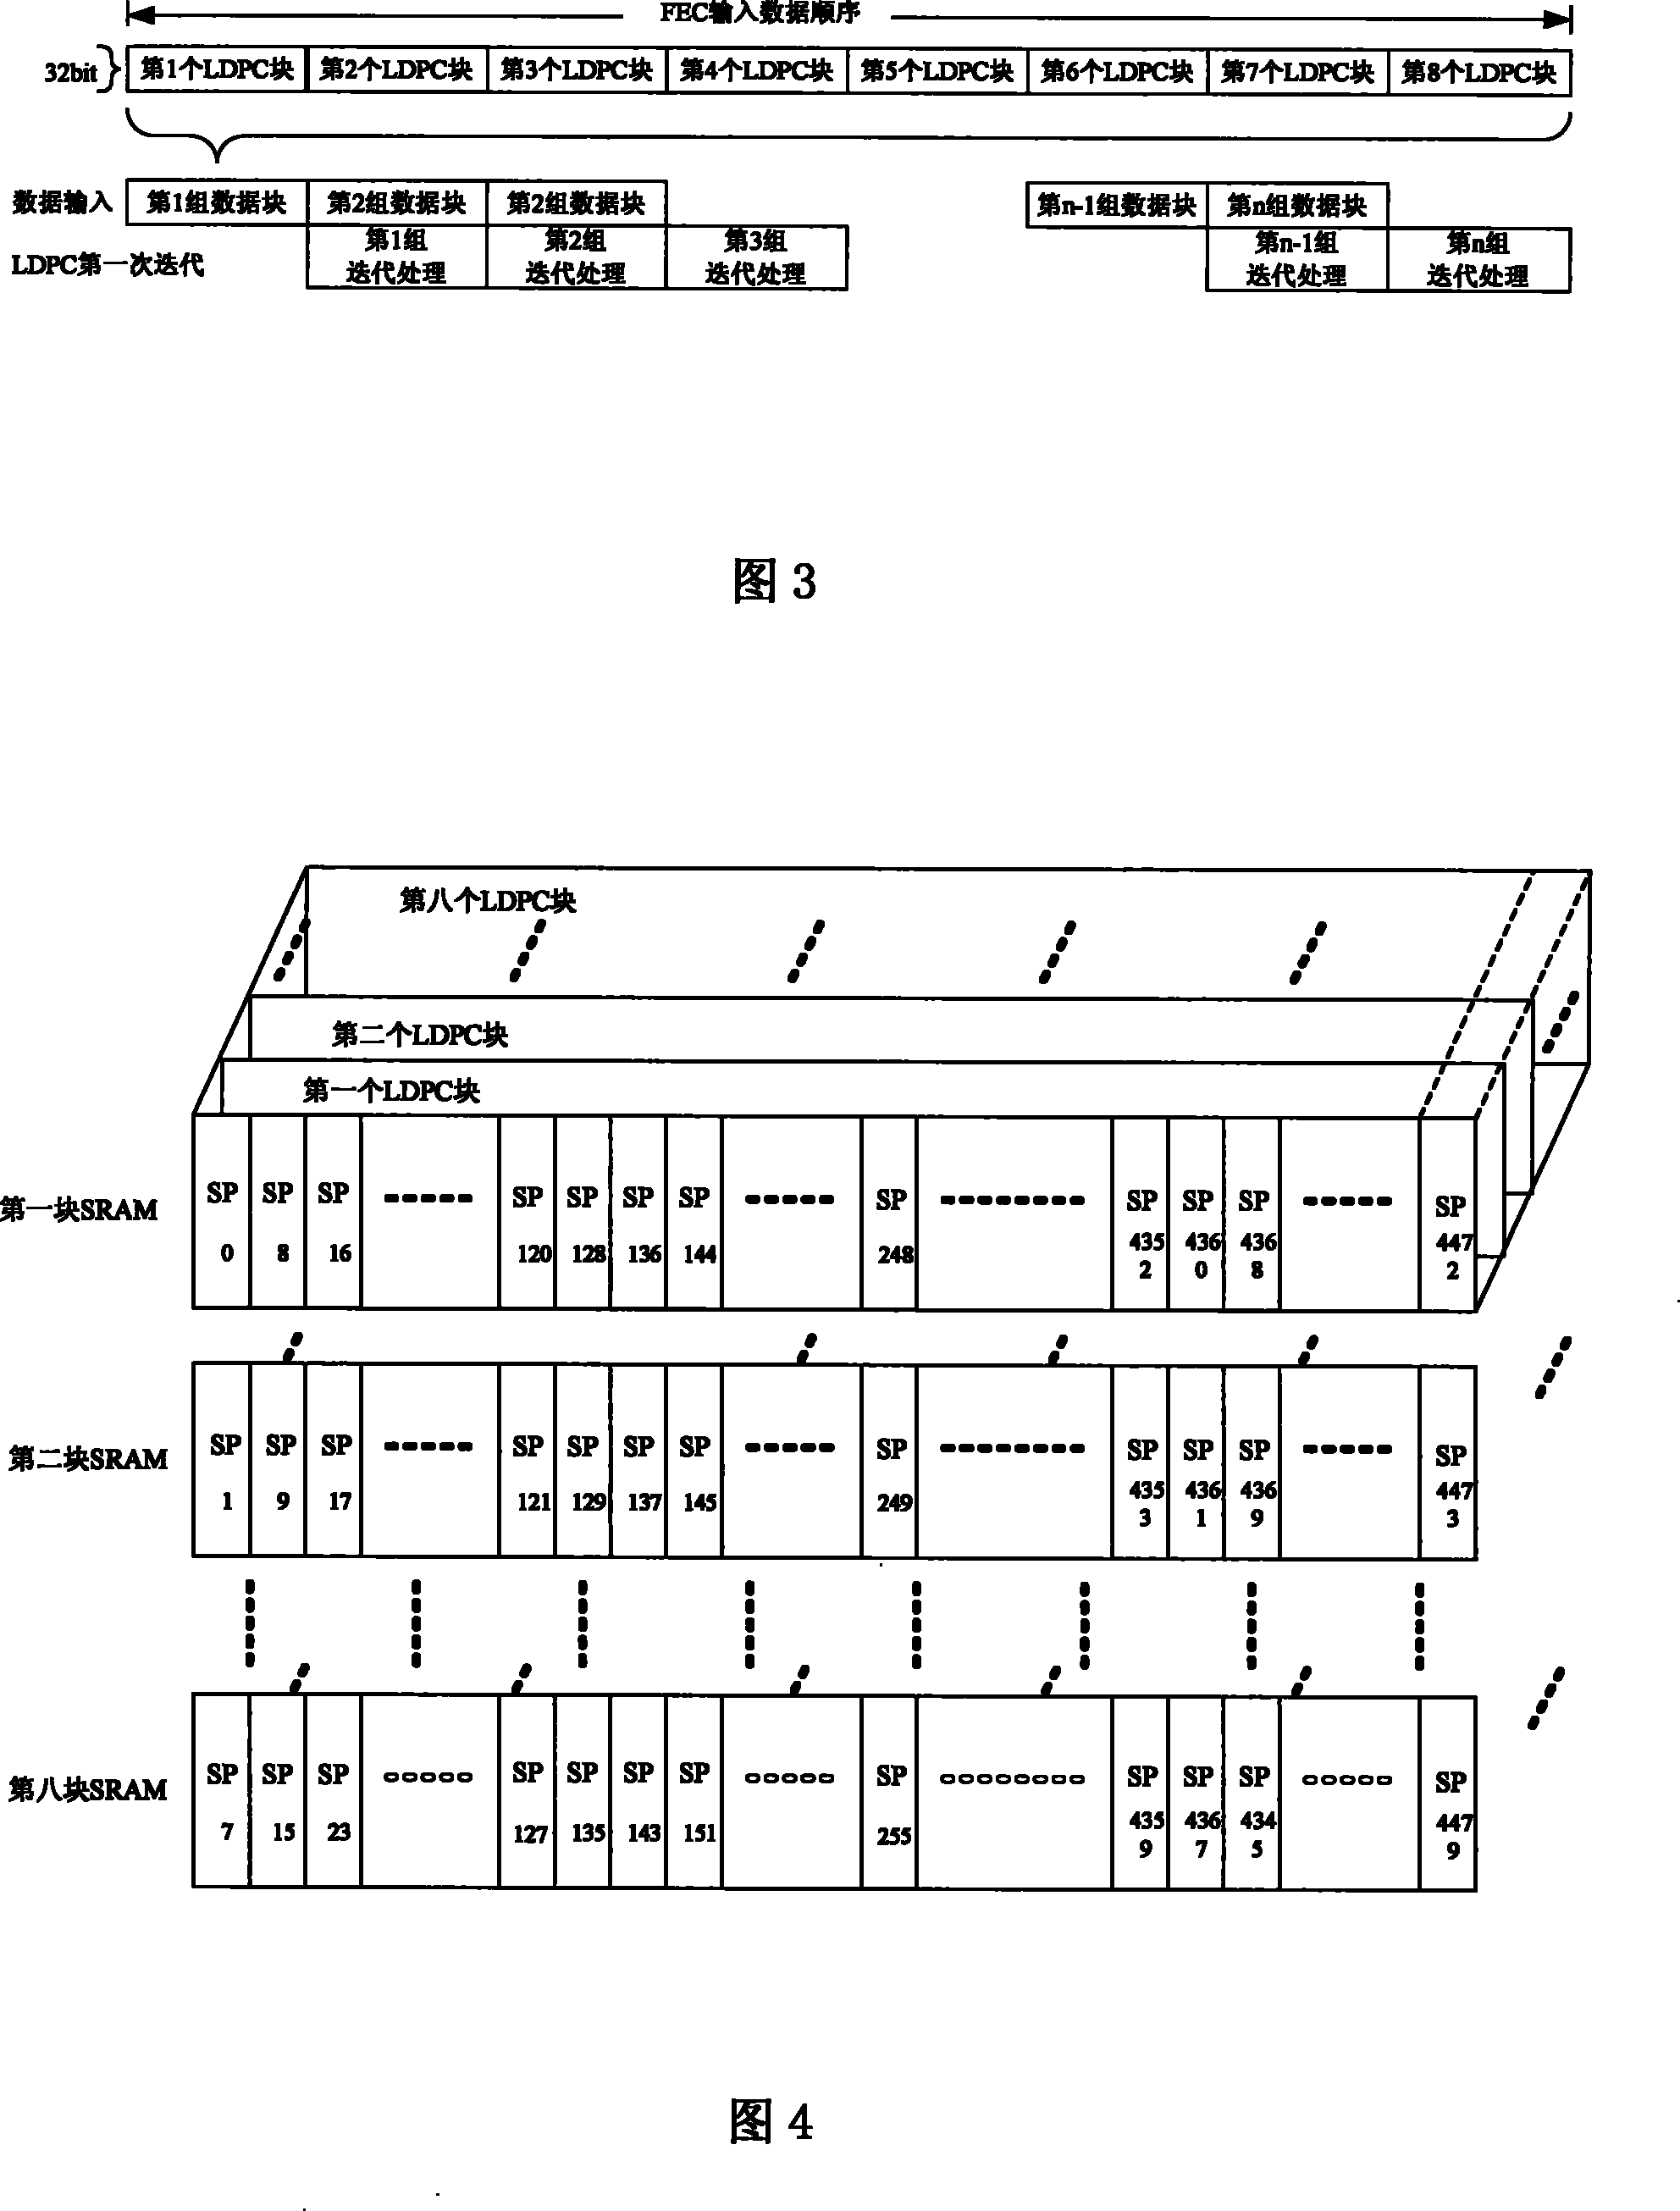 Hardware architecture for decoding FEC of DMB-T demodulation chip and decoding method